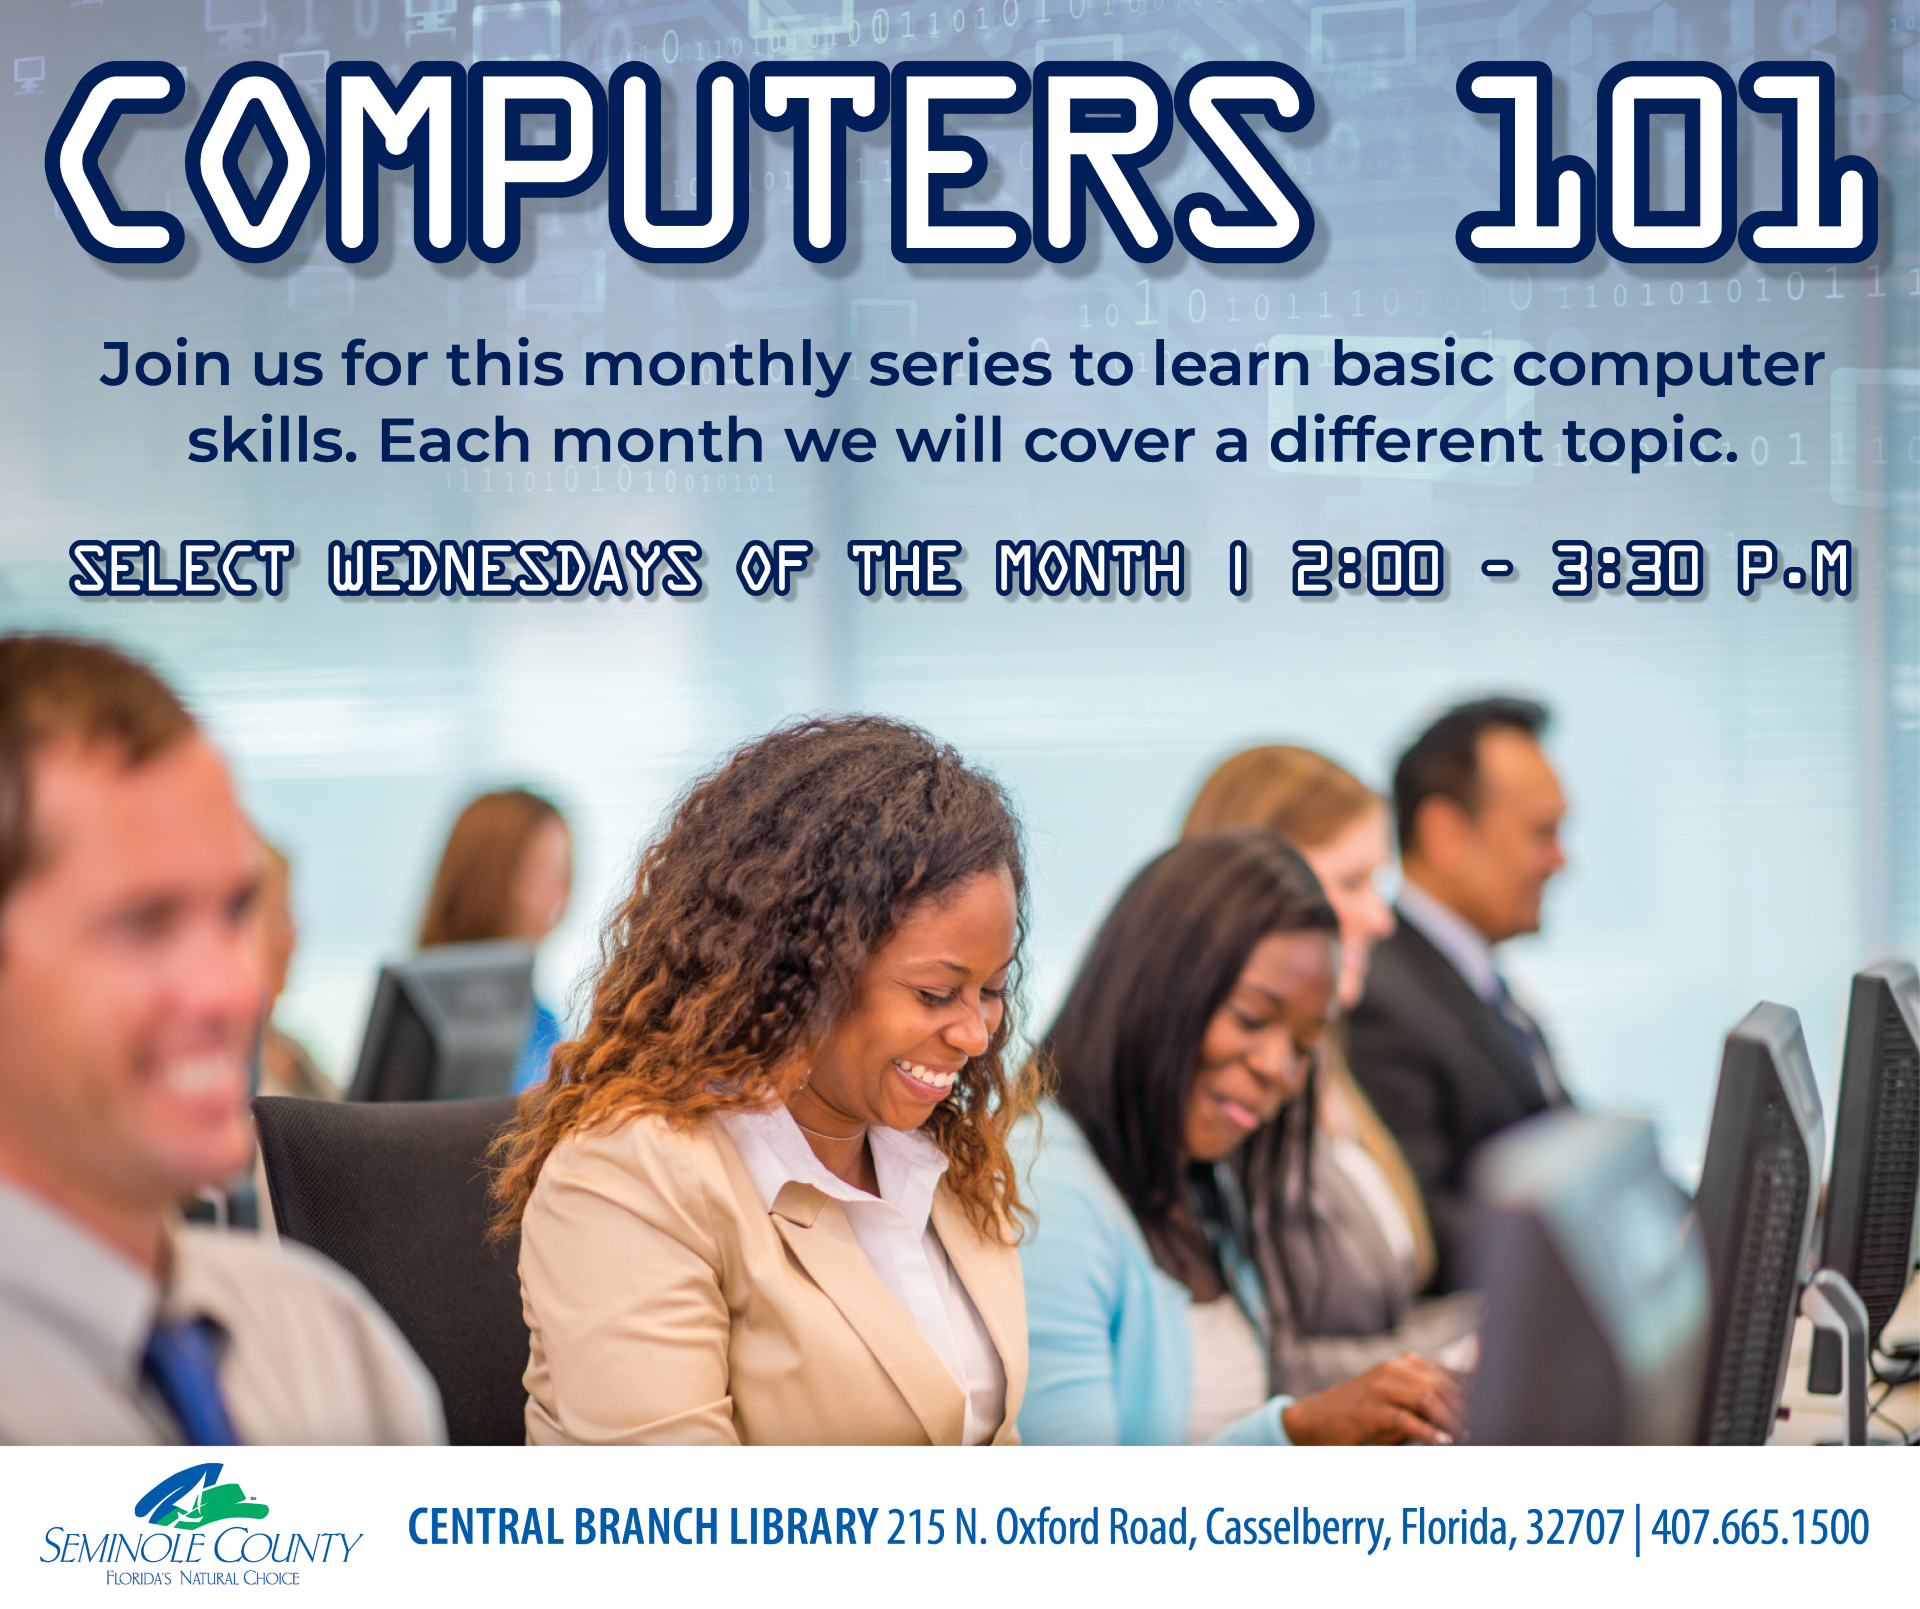 Computers 101 at Central Branch Library